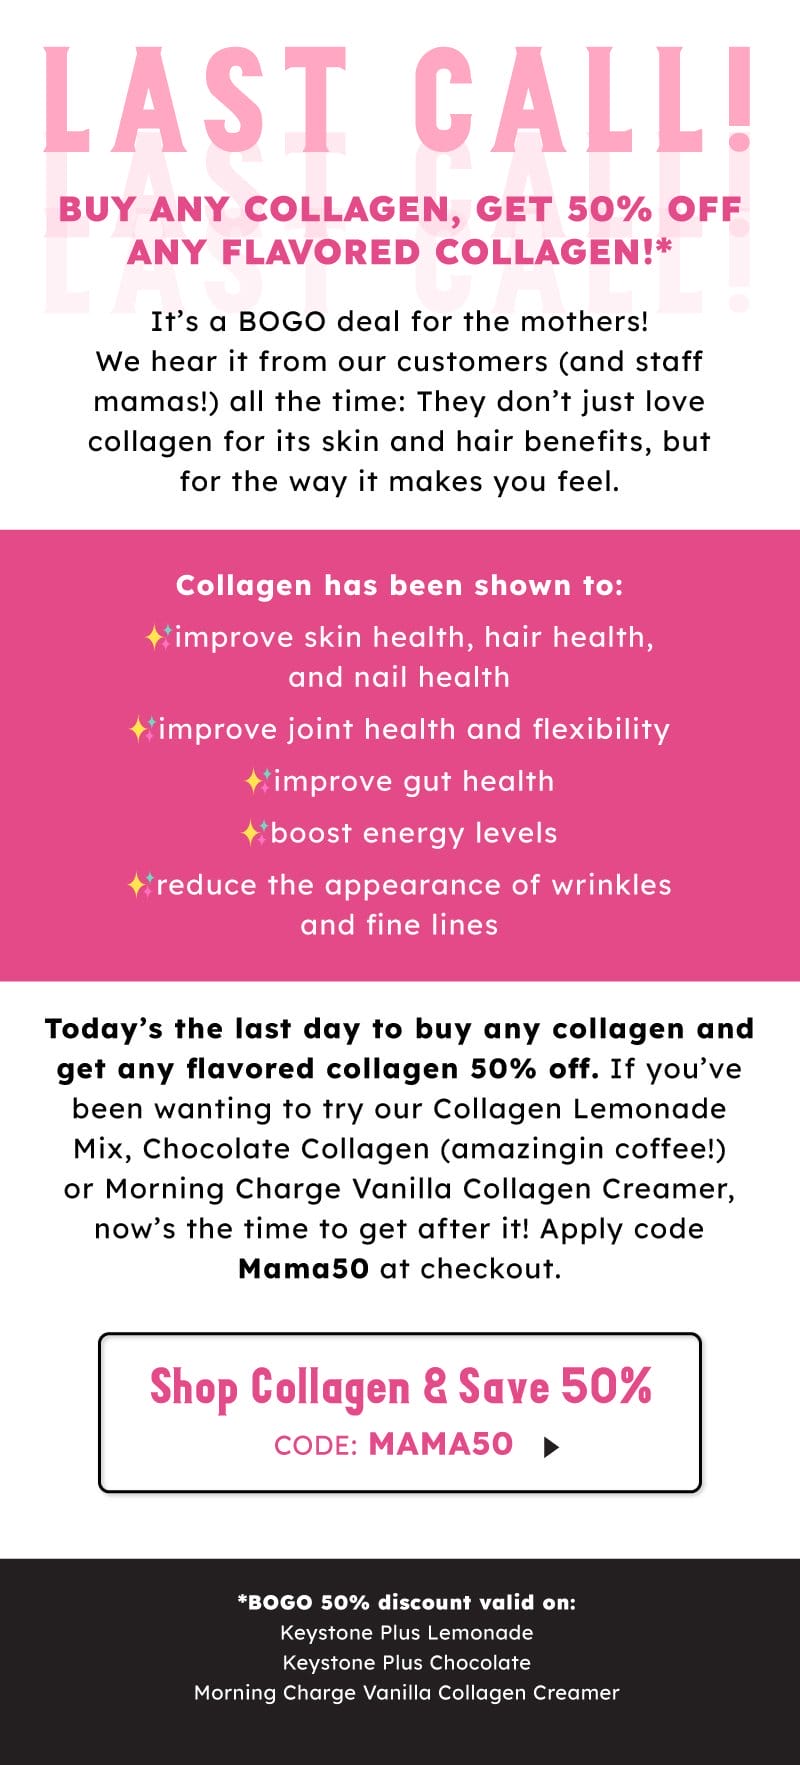 buy any collagen, get a flavored collagen 50% off now!